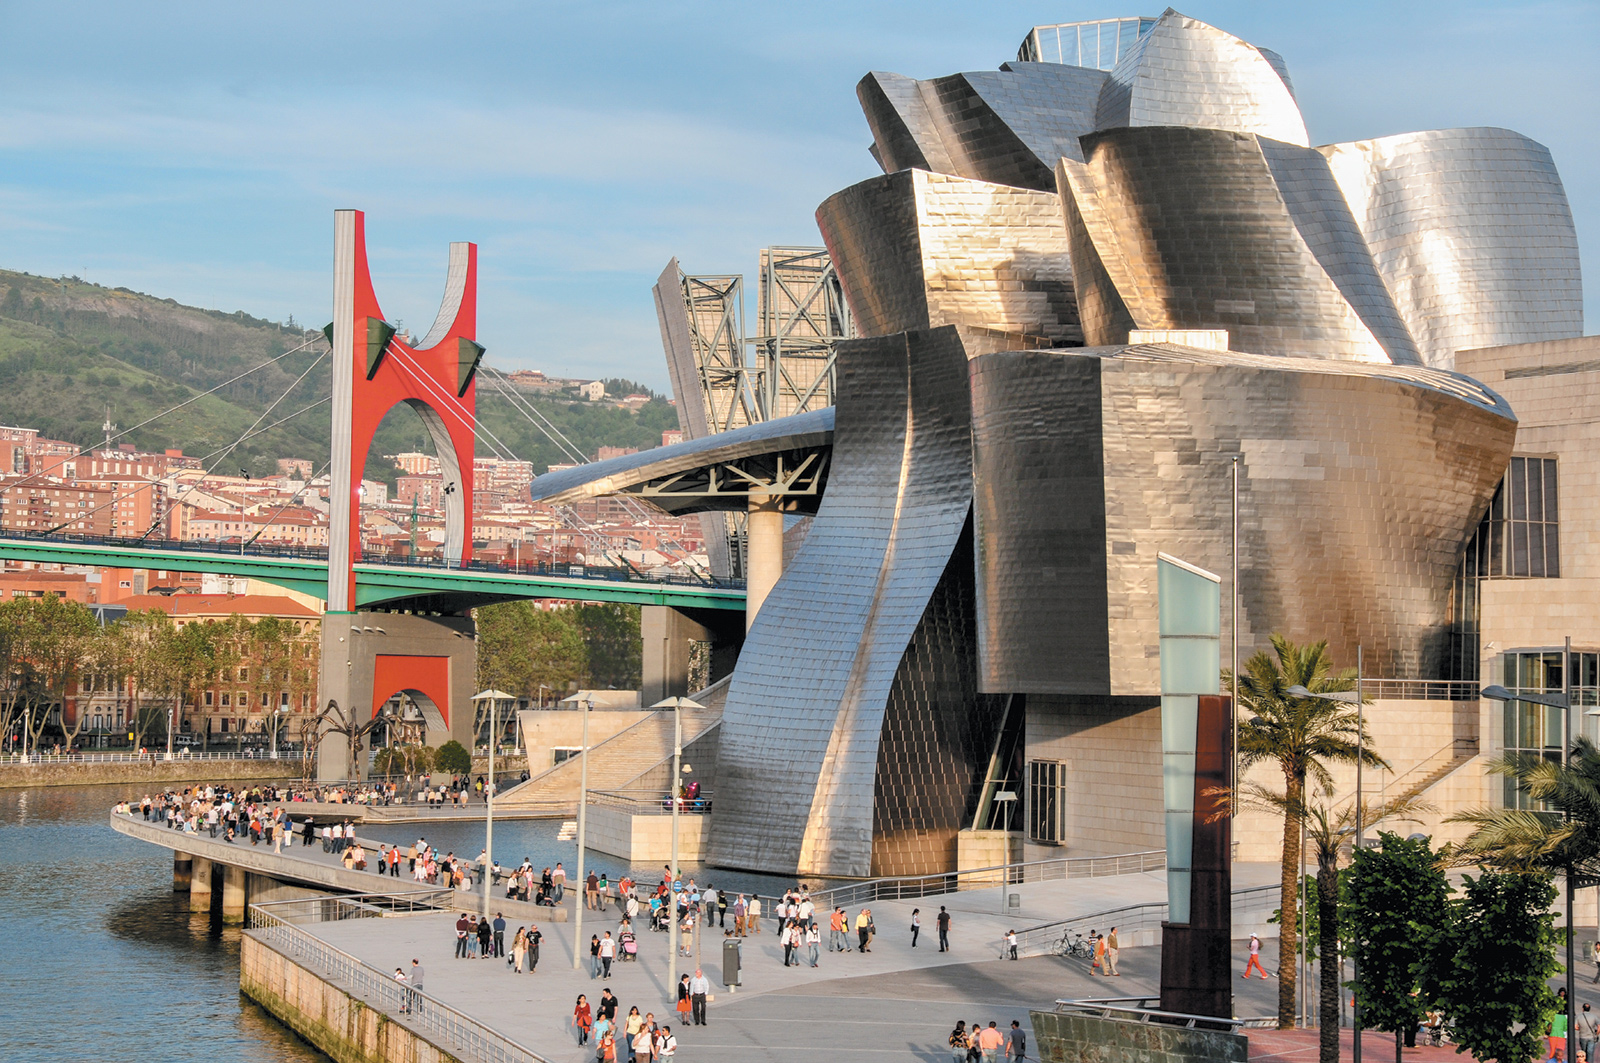 The Guggenheim Museum in Bilbao, Spain, designed by architect Frank Gehry. At left are the Nervión River and La Salve Bridge, adorned with Daniel Buren’s artwork Red Arches (2007), commissioned for the museum’s tenth anniversary.